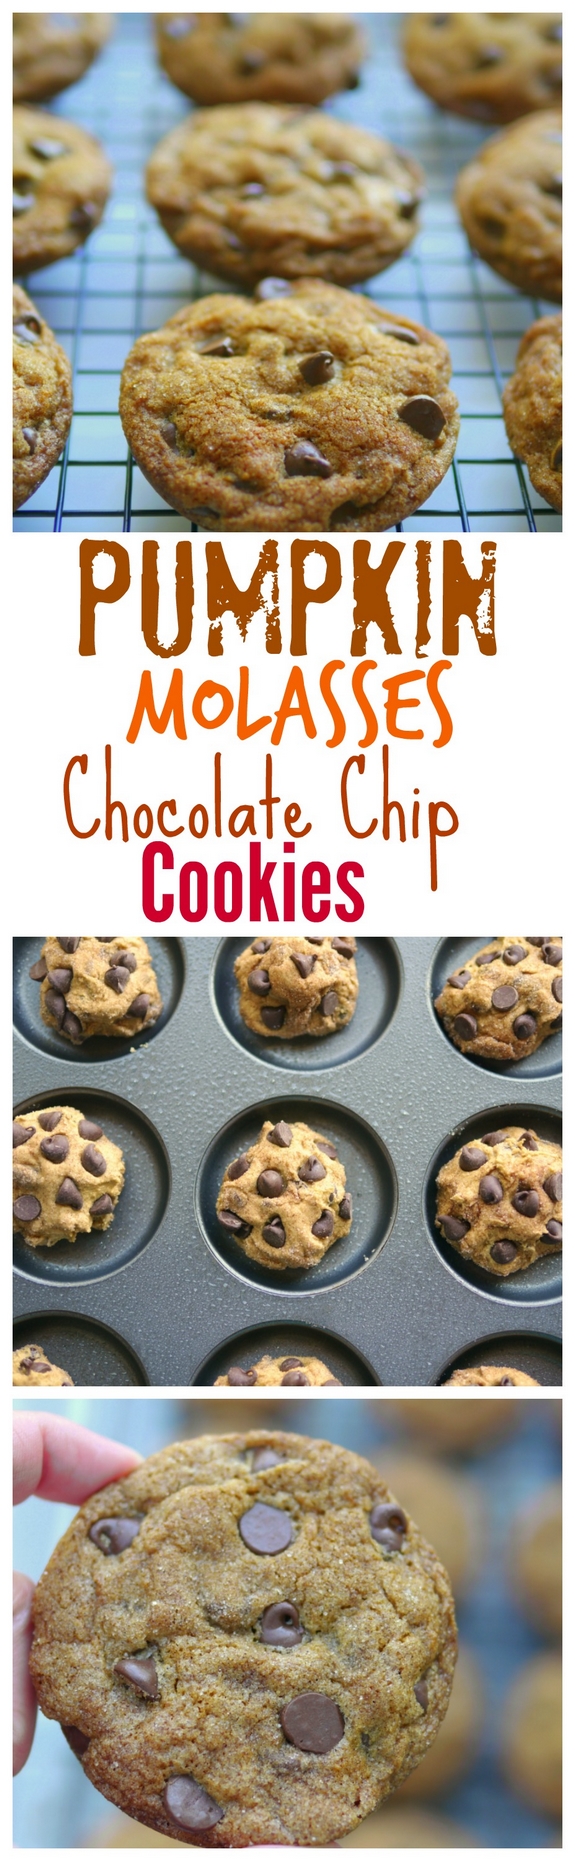 Soft Baked Pumpkin Molasses Chocolate Chip Cookies